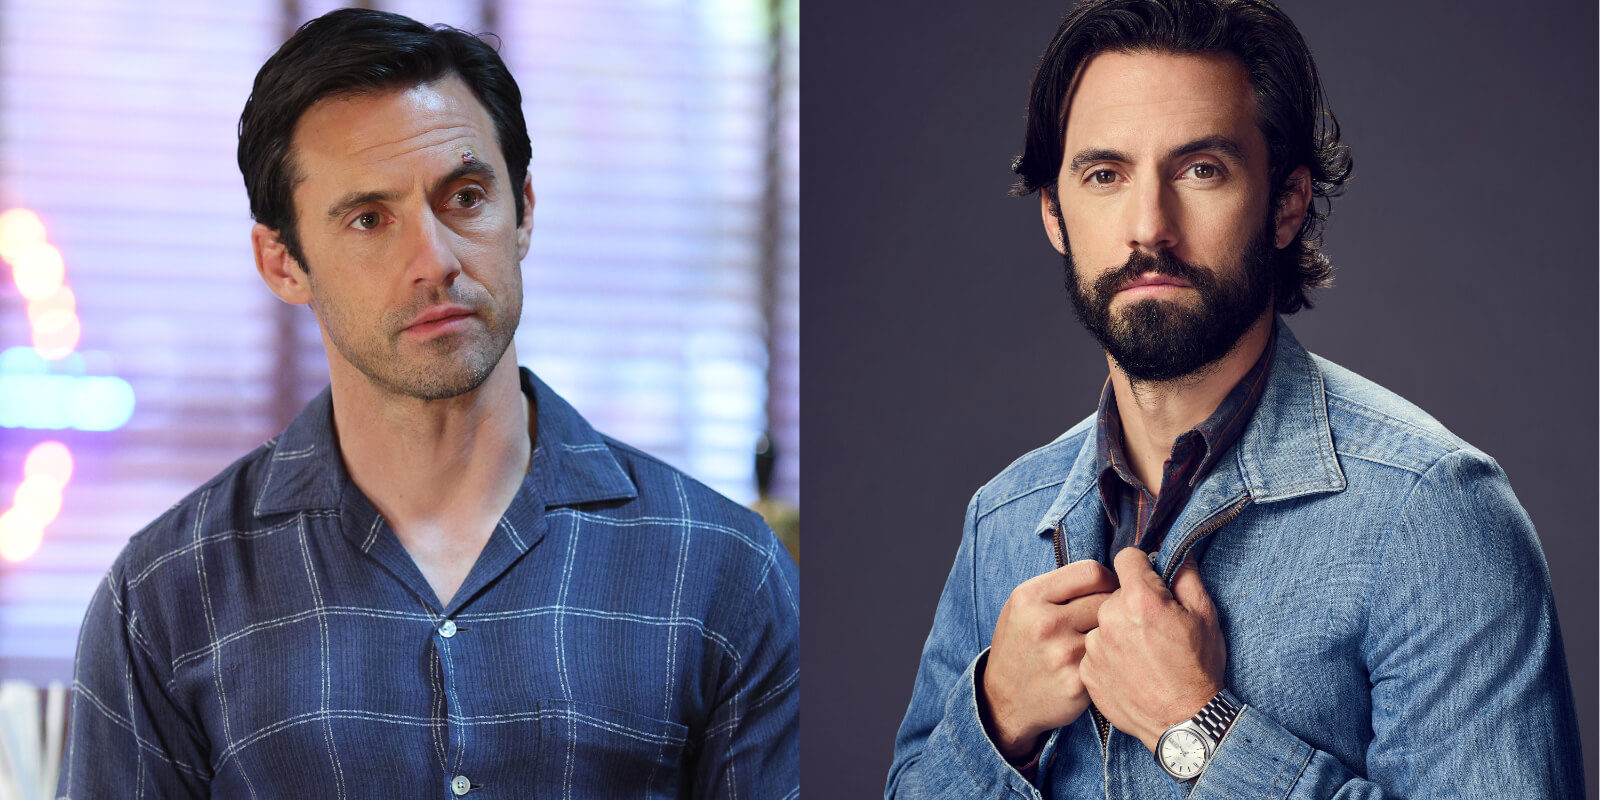 Milo Ventimiglia in side by side photos from the series' 'The Company You Keep' and 'This Is Us.'